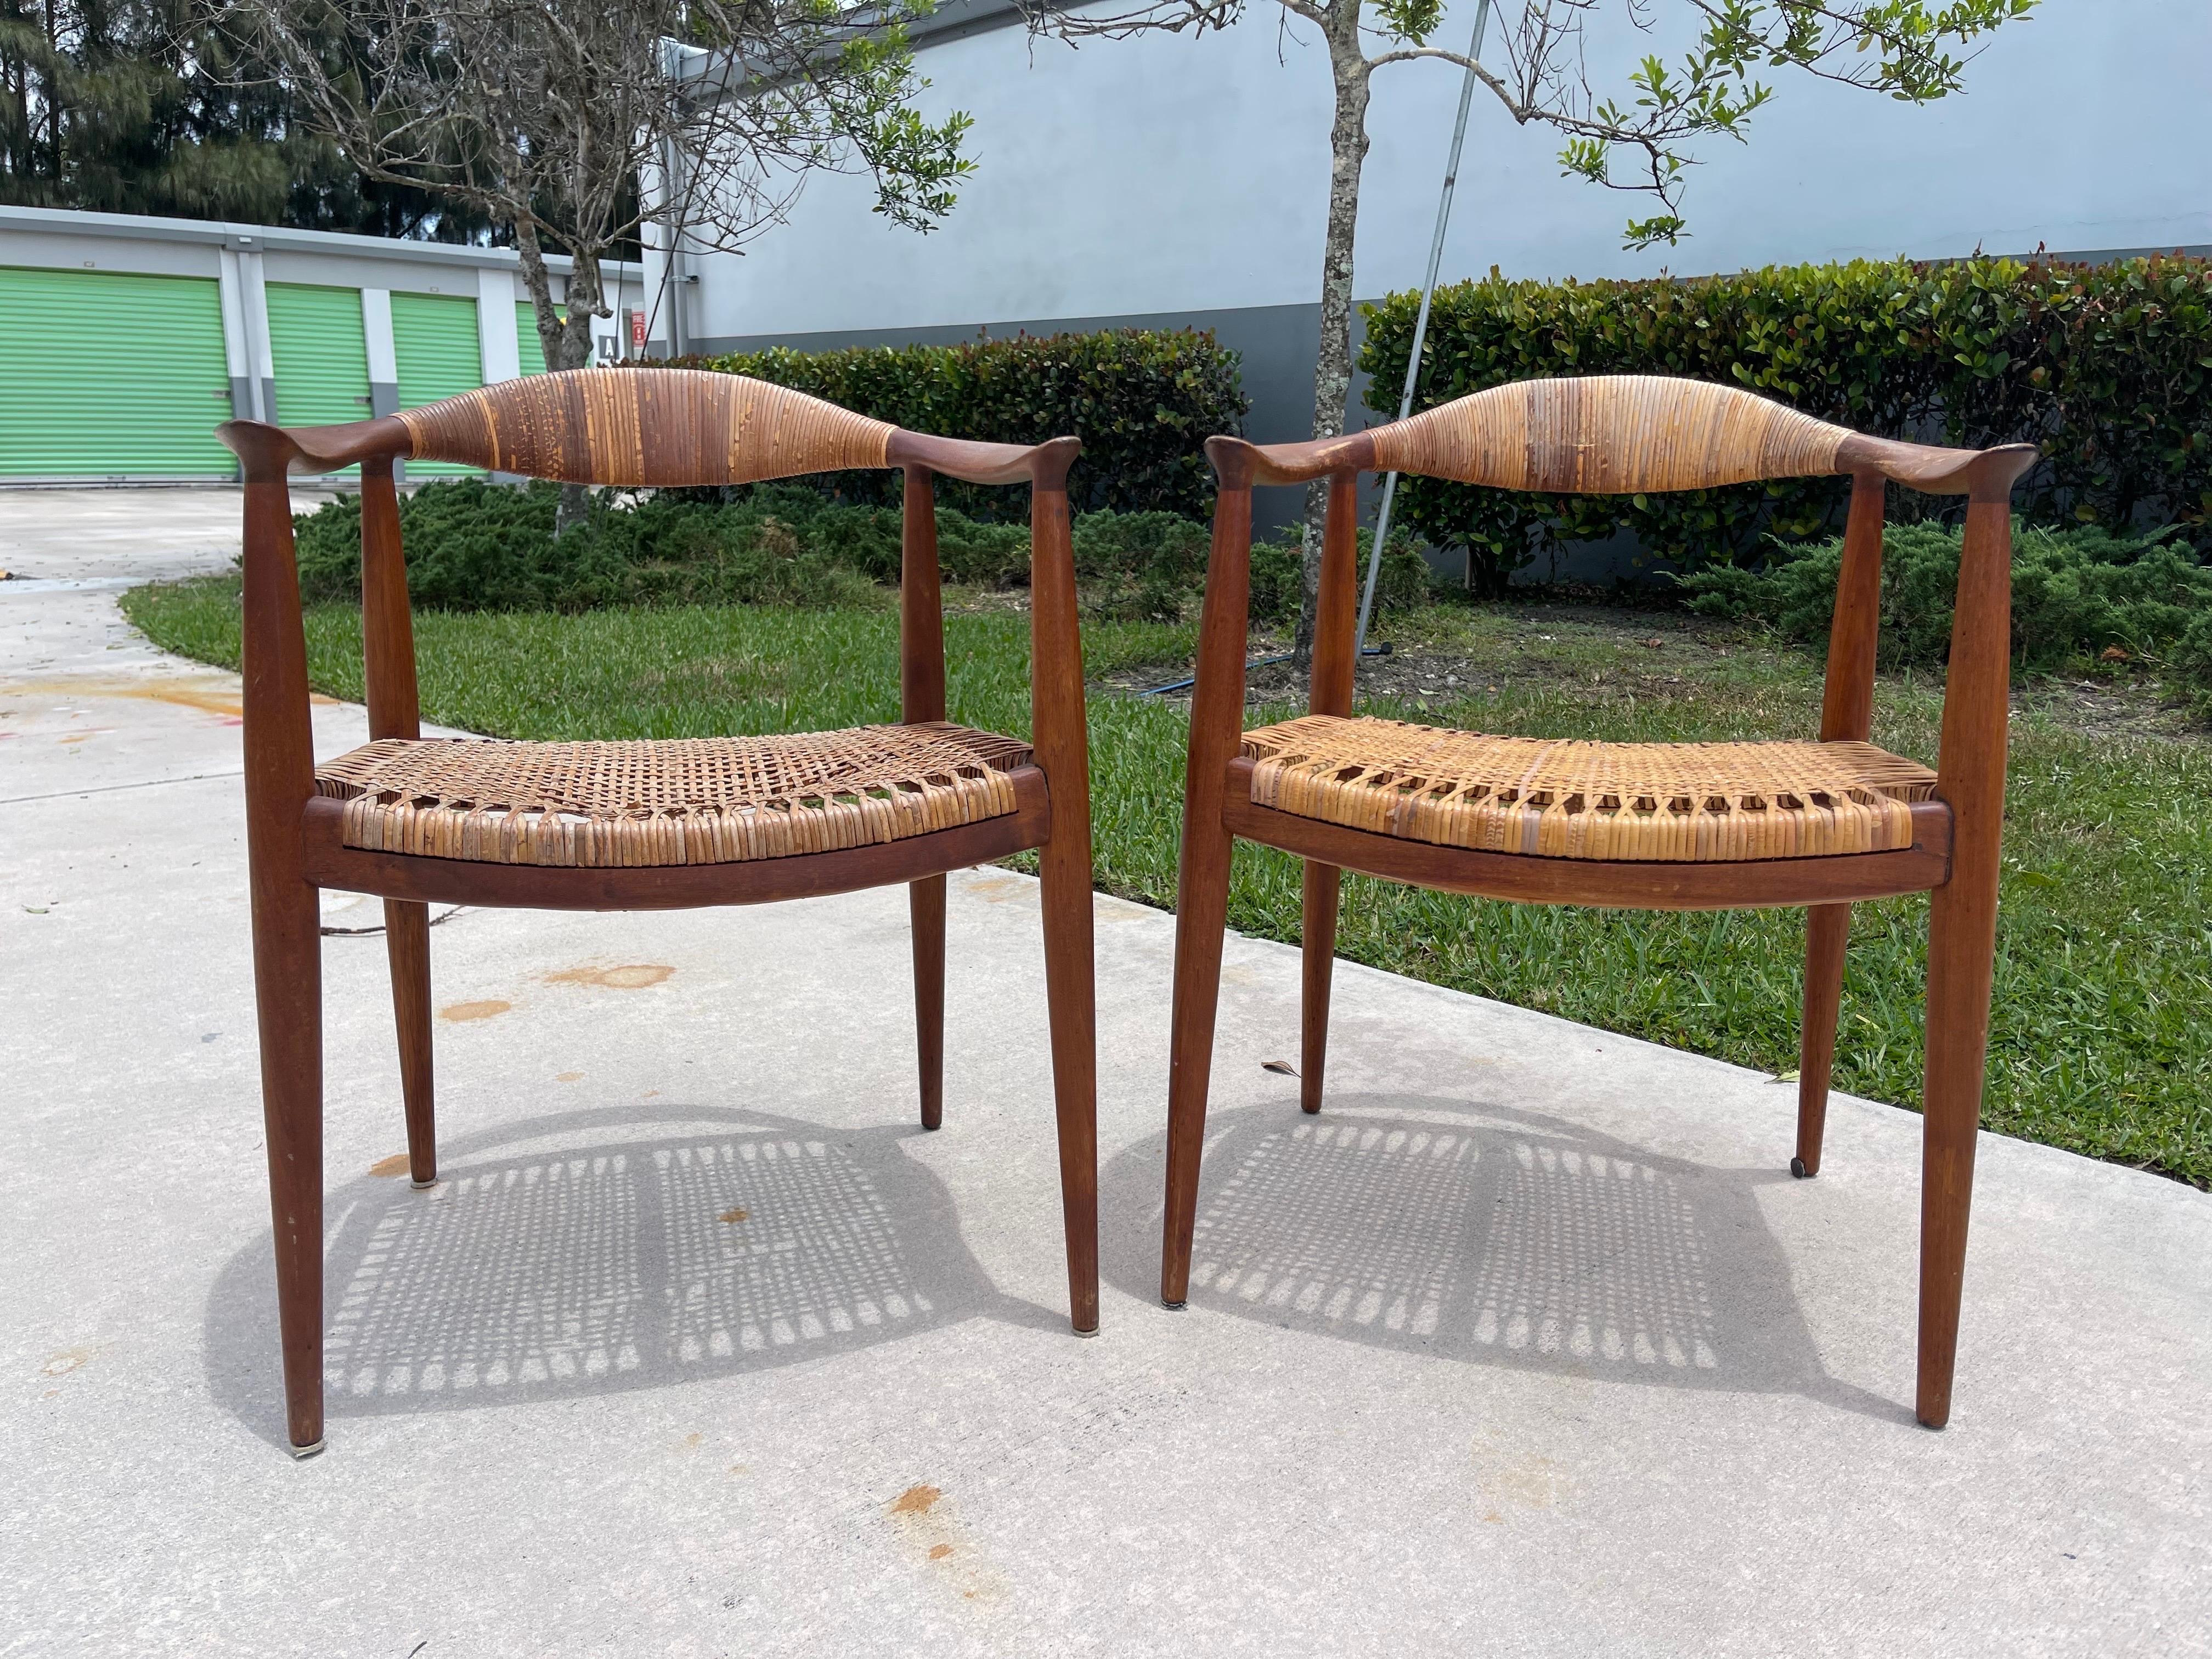 Mid-20th Century Hans Wegner “The Chair” Early Example Teak, Cane Armchairs, a Pair For Sale